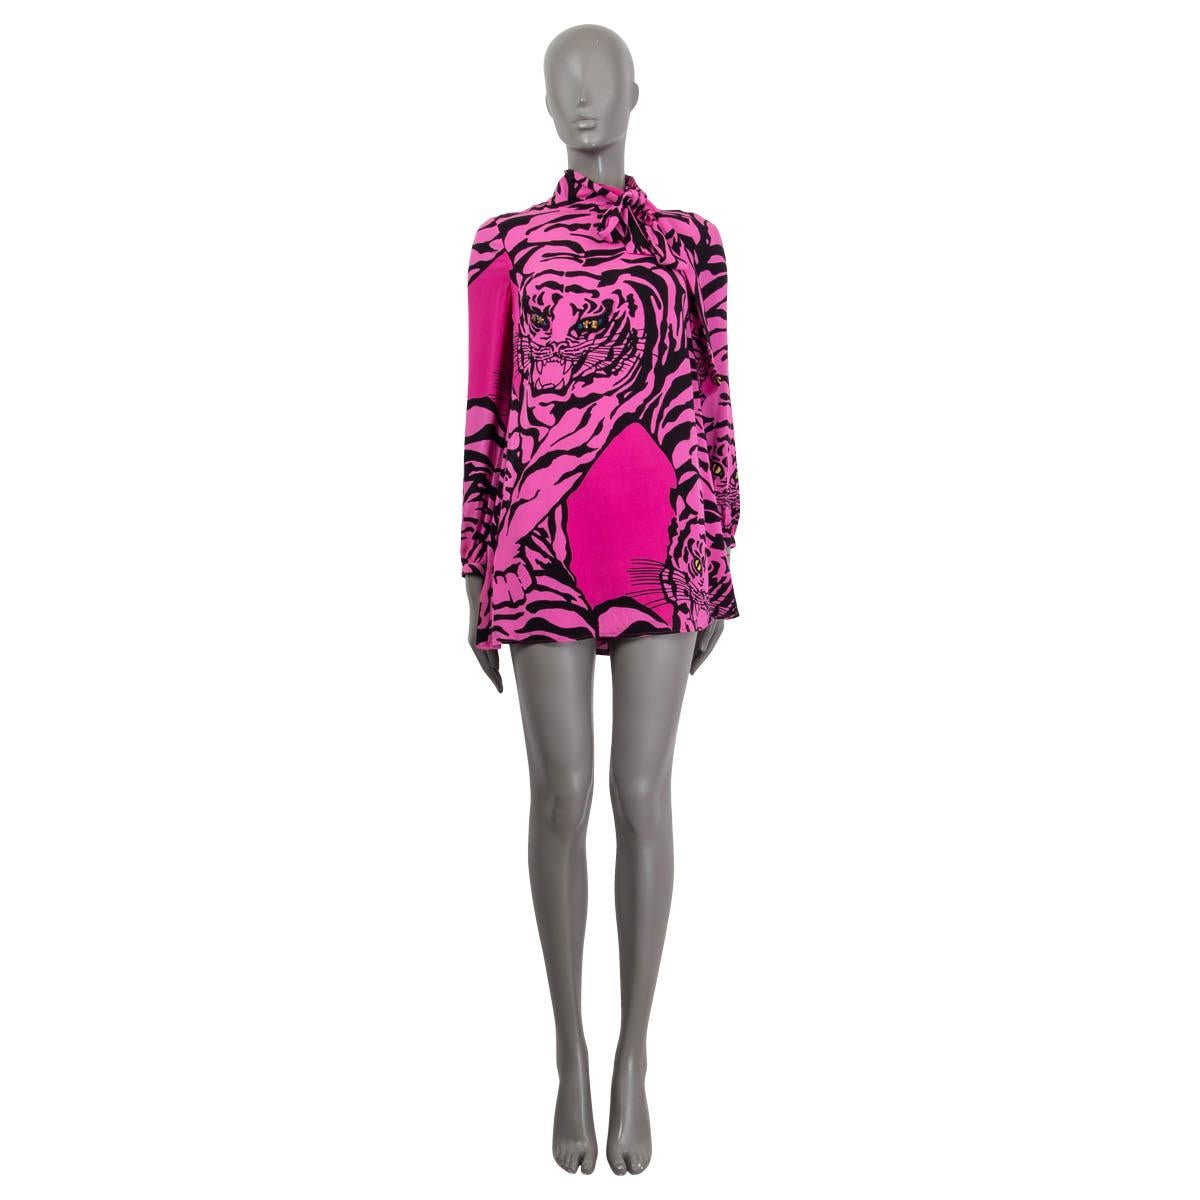 100% authentic Valentino long-sleeve tiger-print dress in pink and black silk (100%) with a mock-neck and self-tie bow. Closes on the back with concealed zipper and buttons on the cuffs. Lined in (91%) silk and elastane (9%). Embroidery thread in